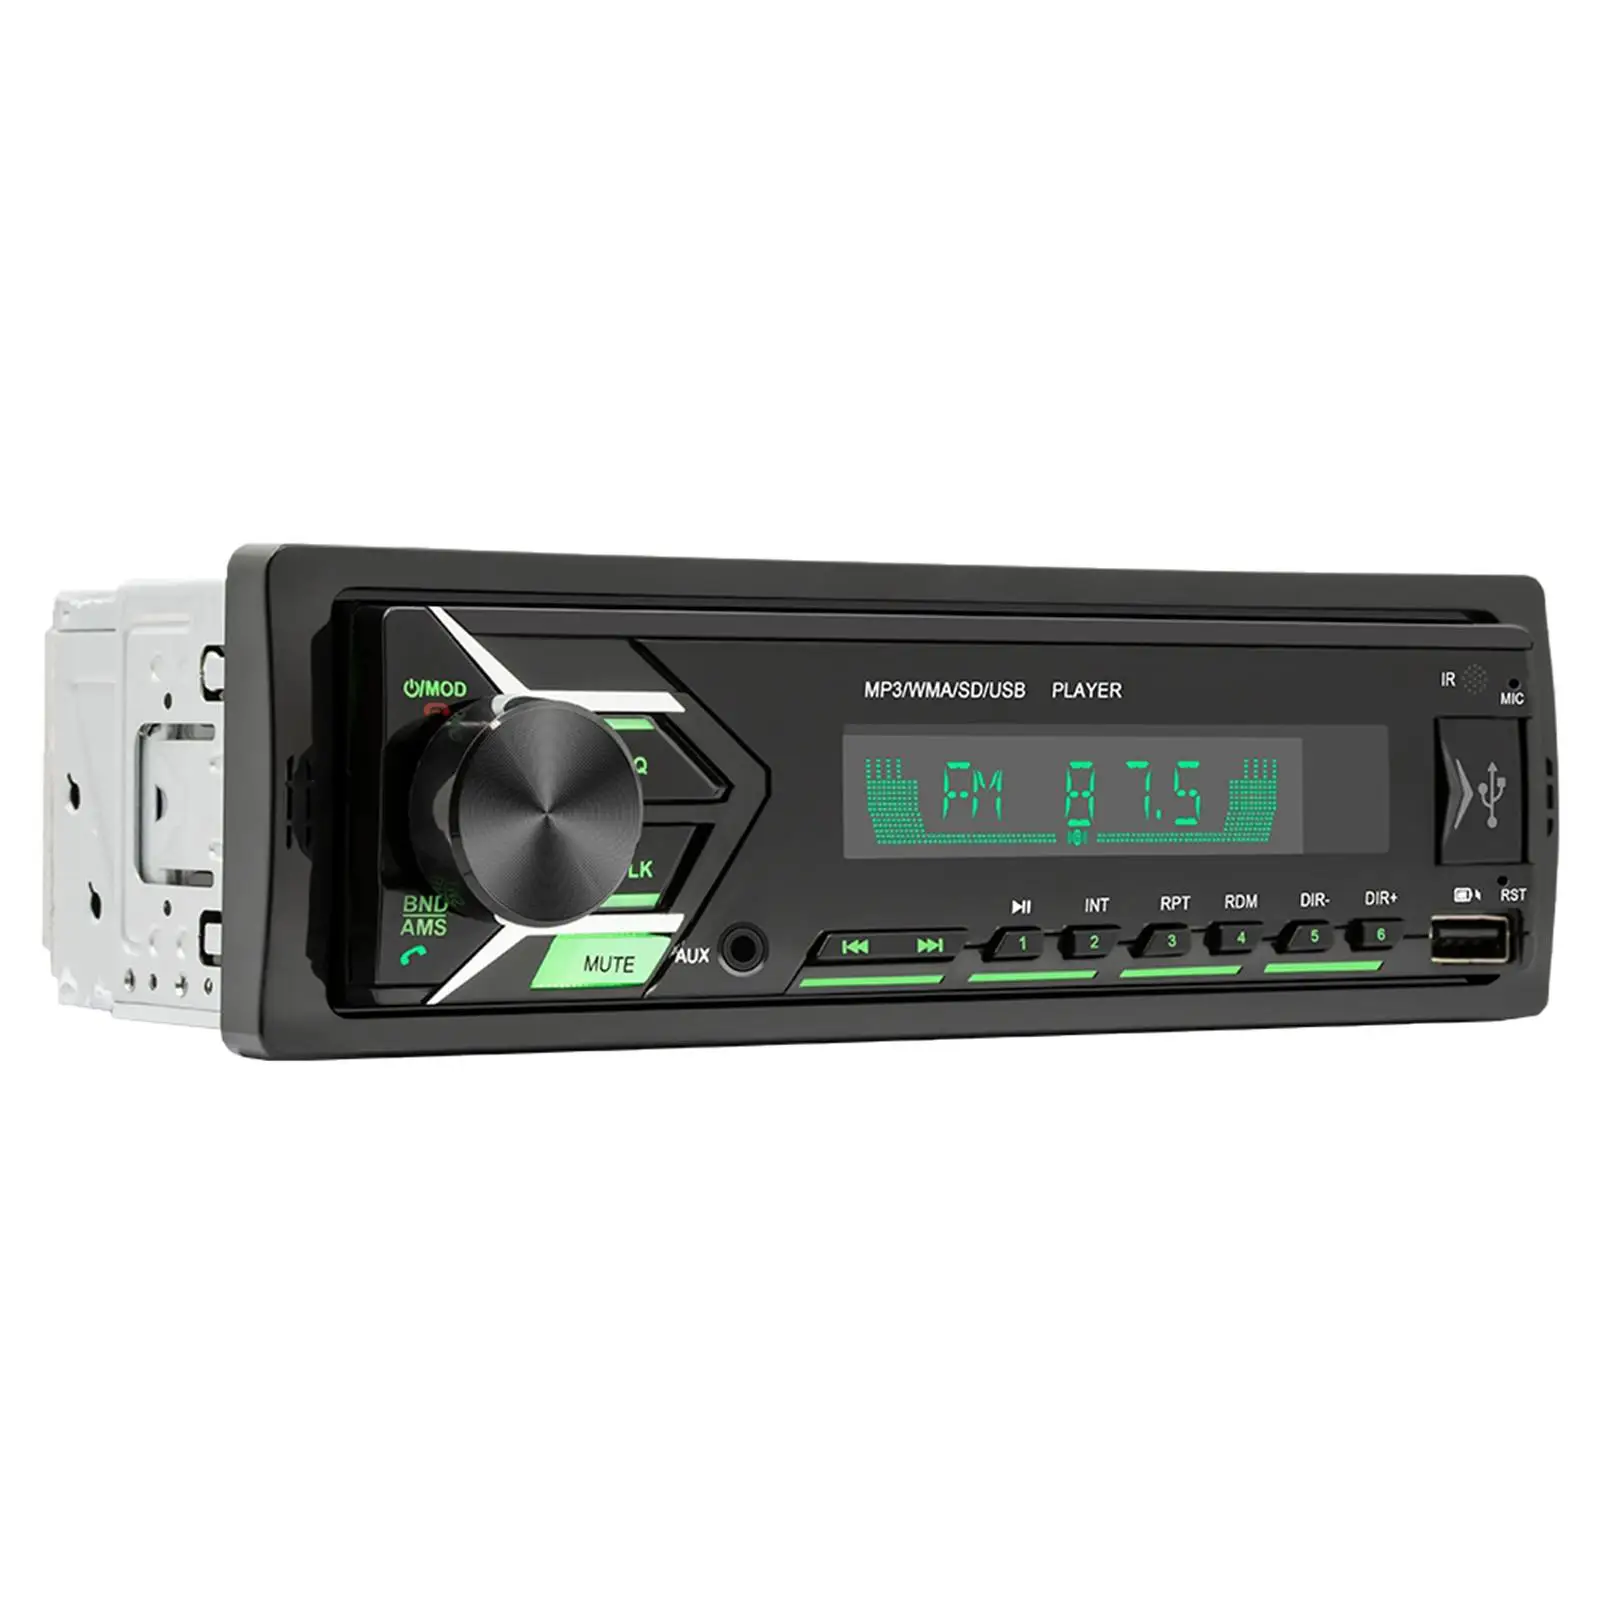  Digital Audio Car Stereo Radio Receiver Hands- Calling Built-in Microph Support / Remote Control, 7 Color